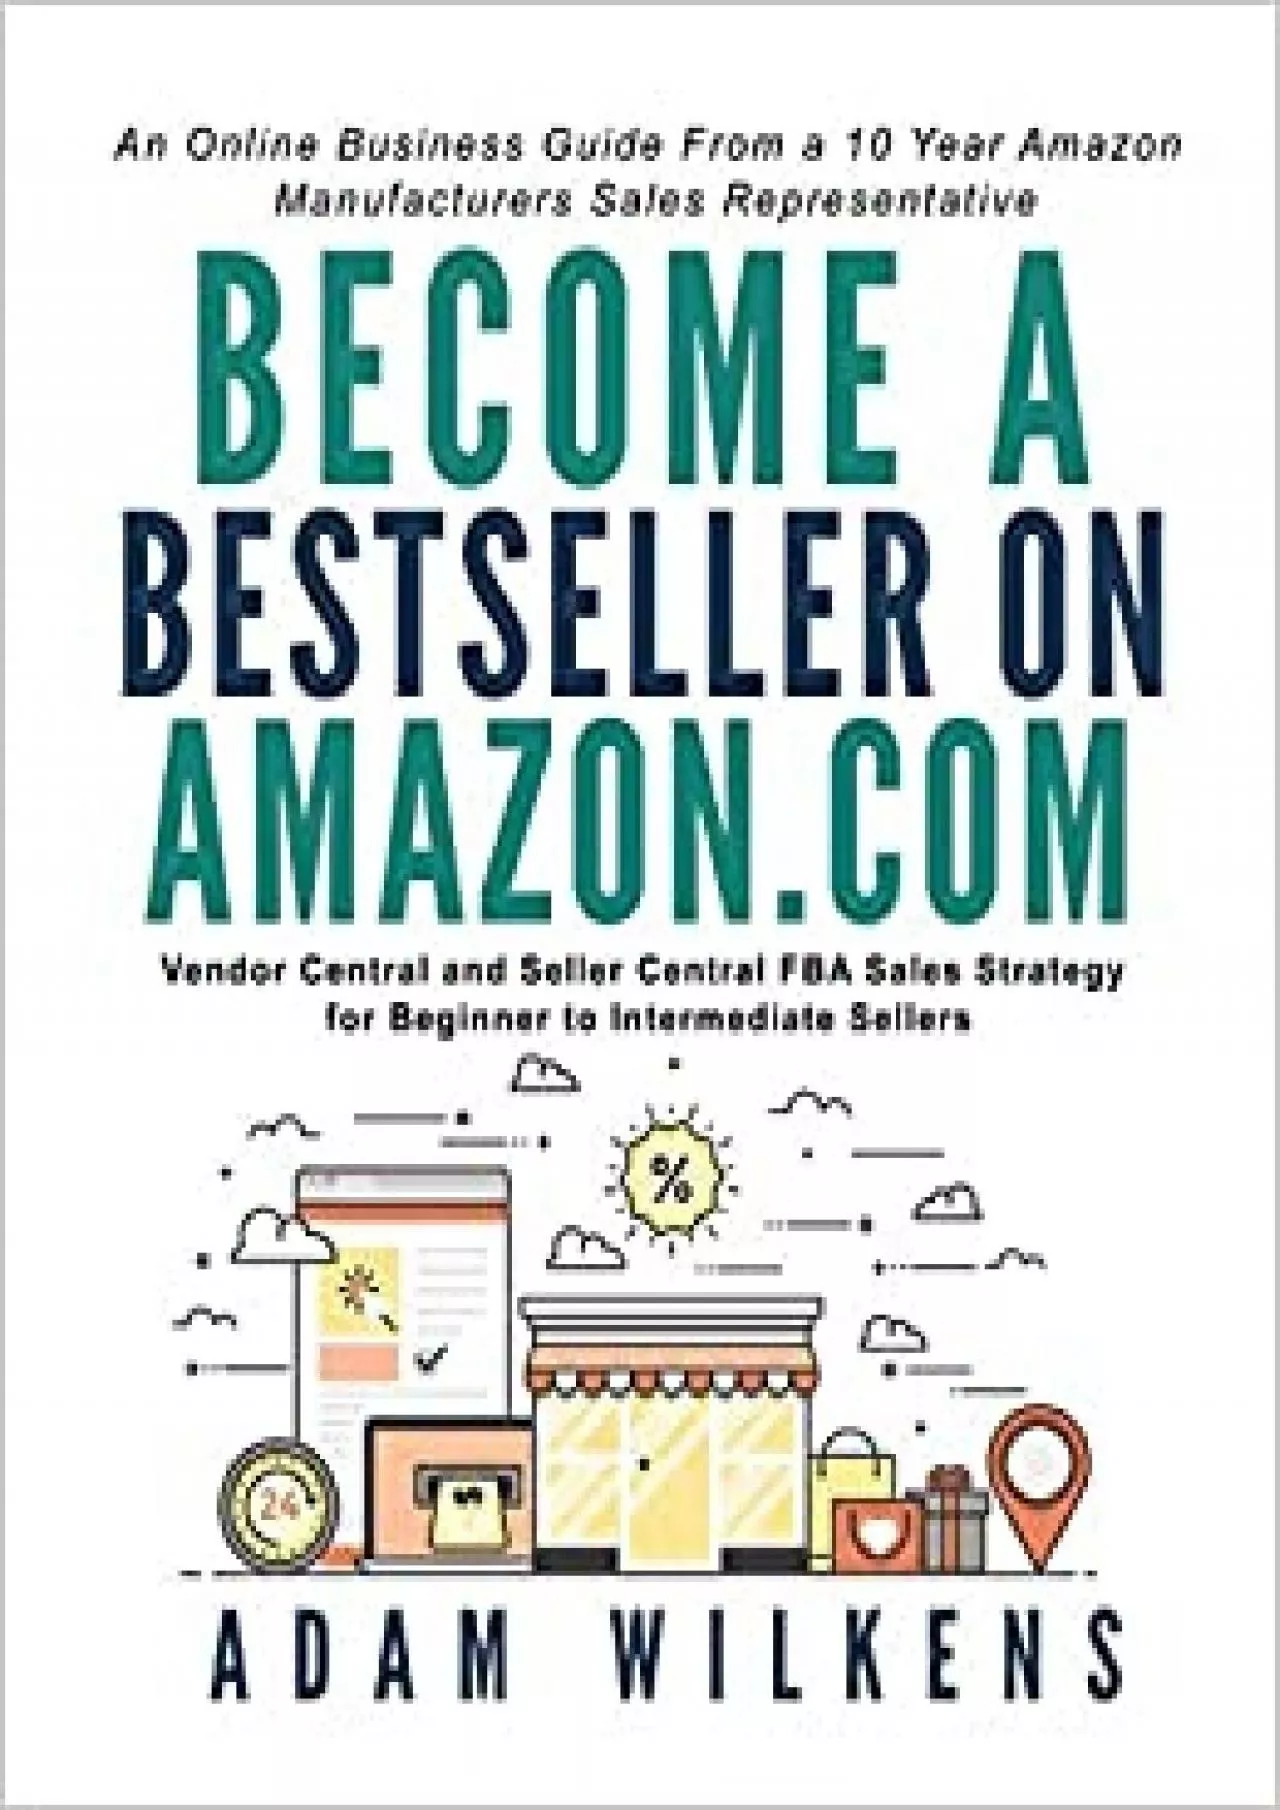 Become a Bestseller on Amazoncom Vendor Central and Seller Central FBA Sales Strategy